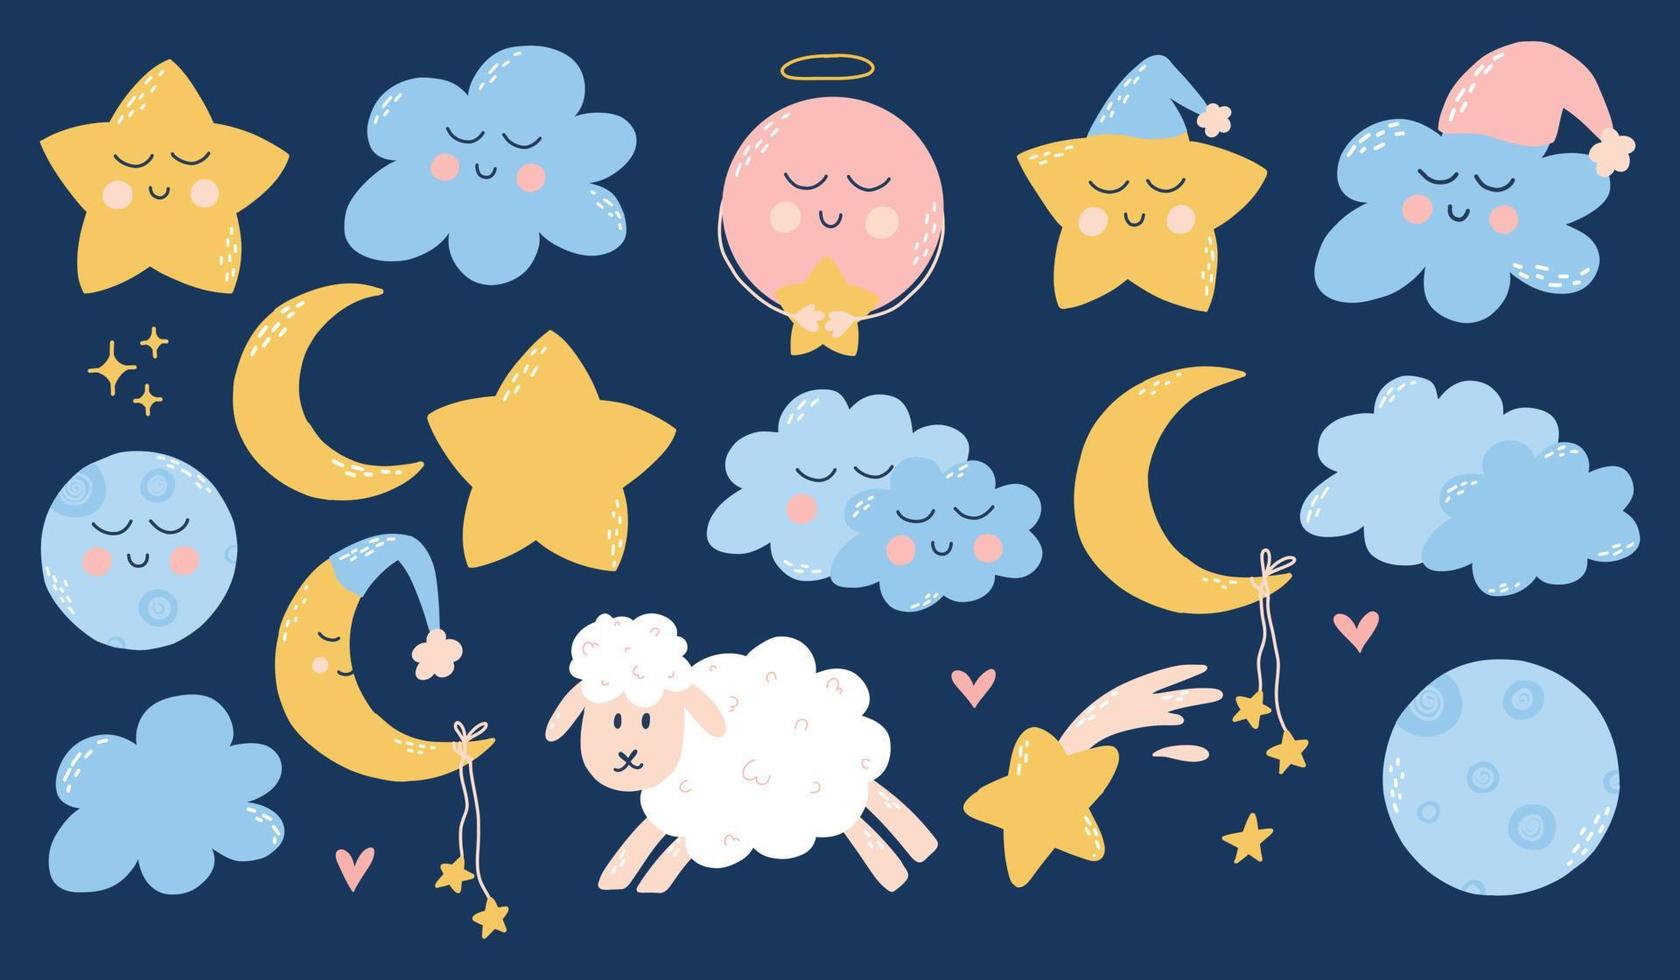 Cute childish set of good night elements. Childrens collection of stars, clouds, moons, planets. Vector illustration in hand drawn cartoon style.